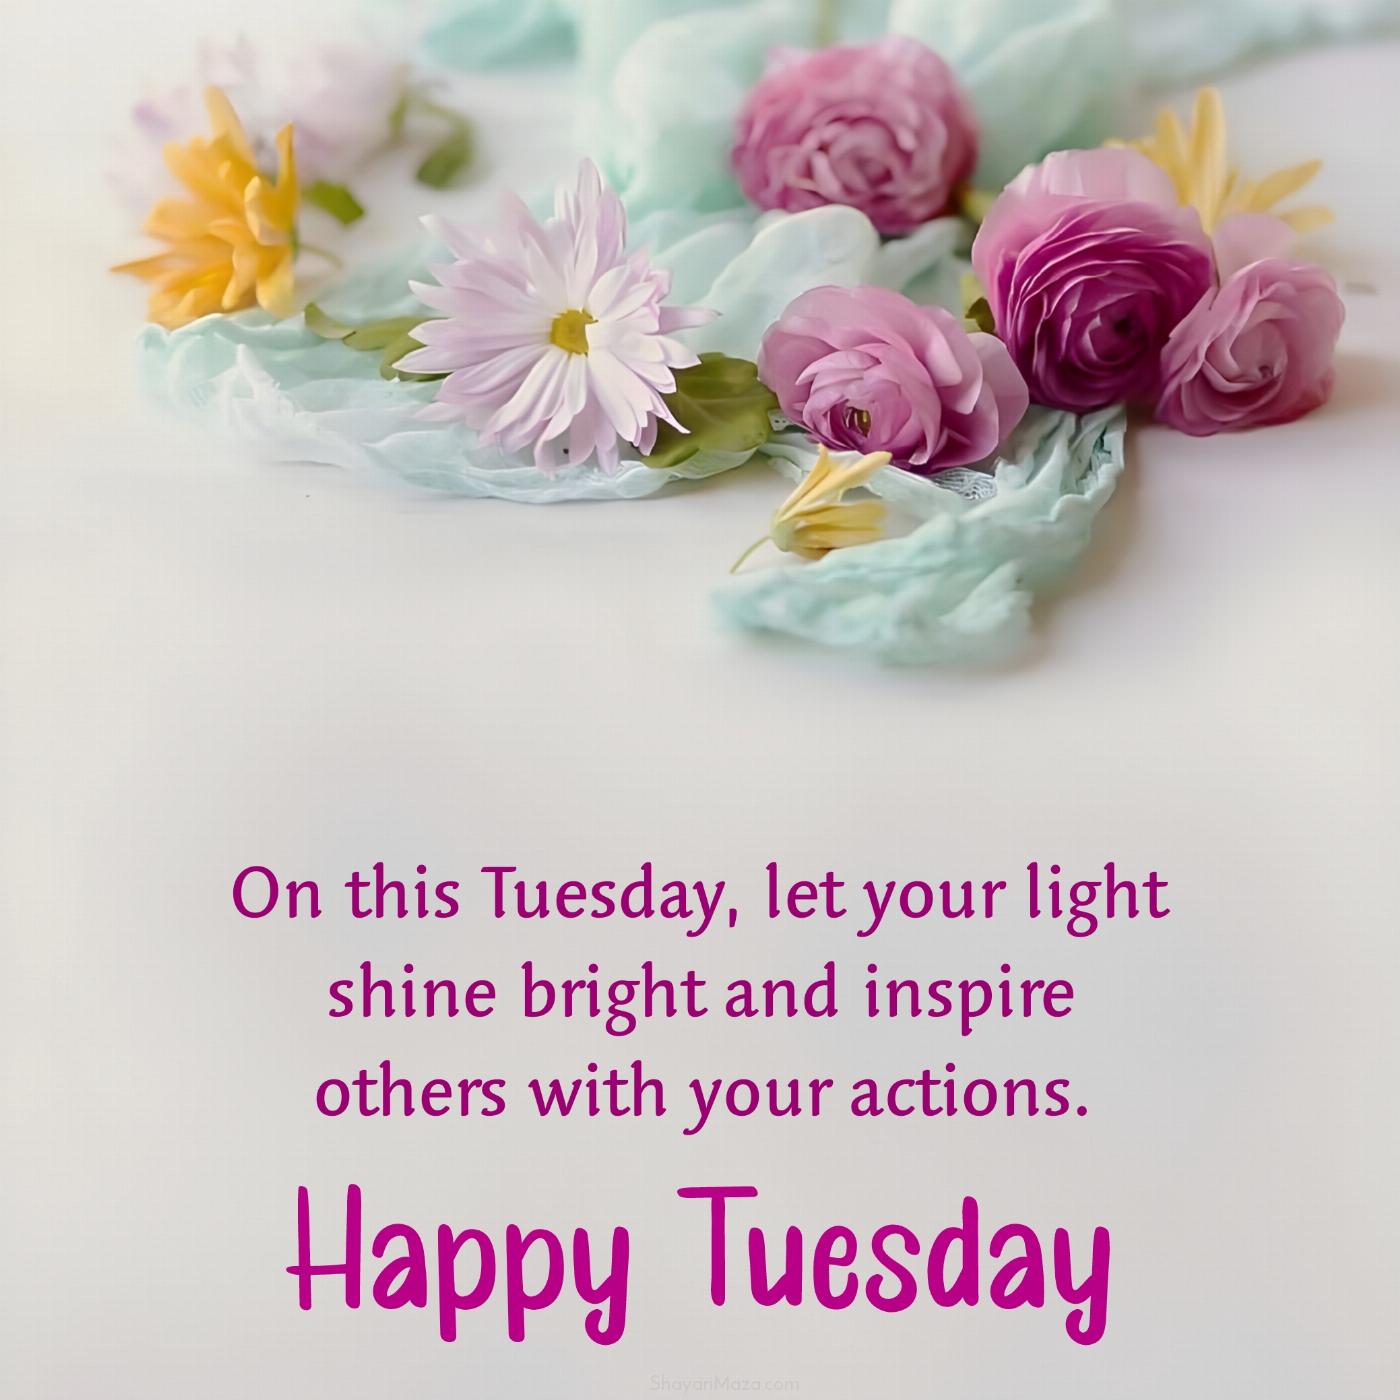 On this Tuesday let your light shine bright and inspire others